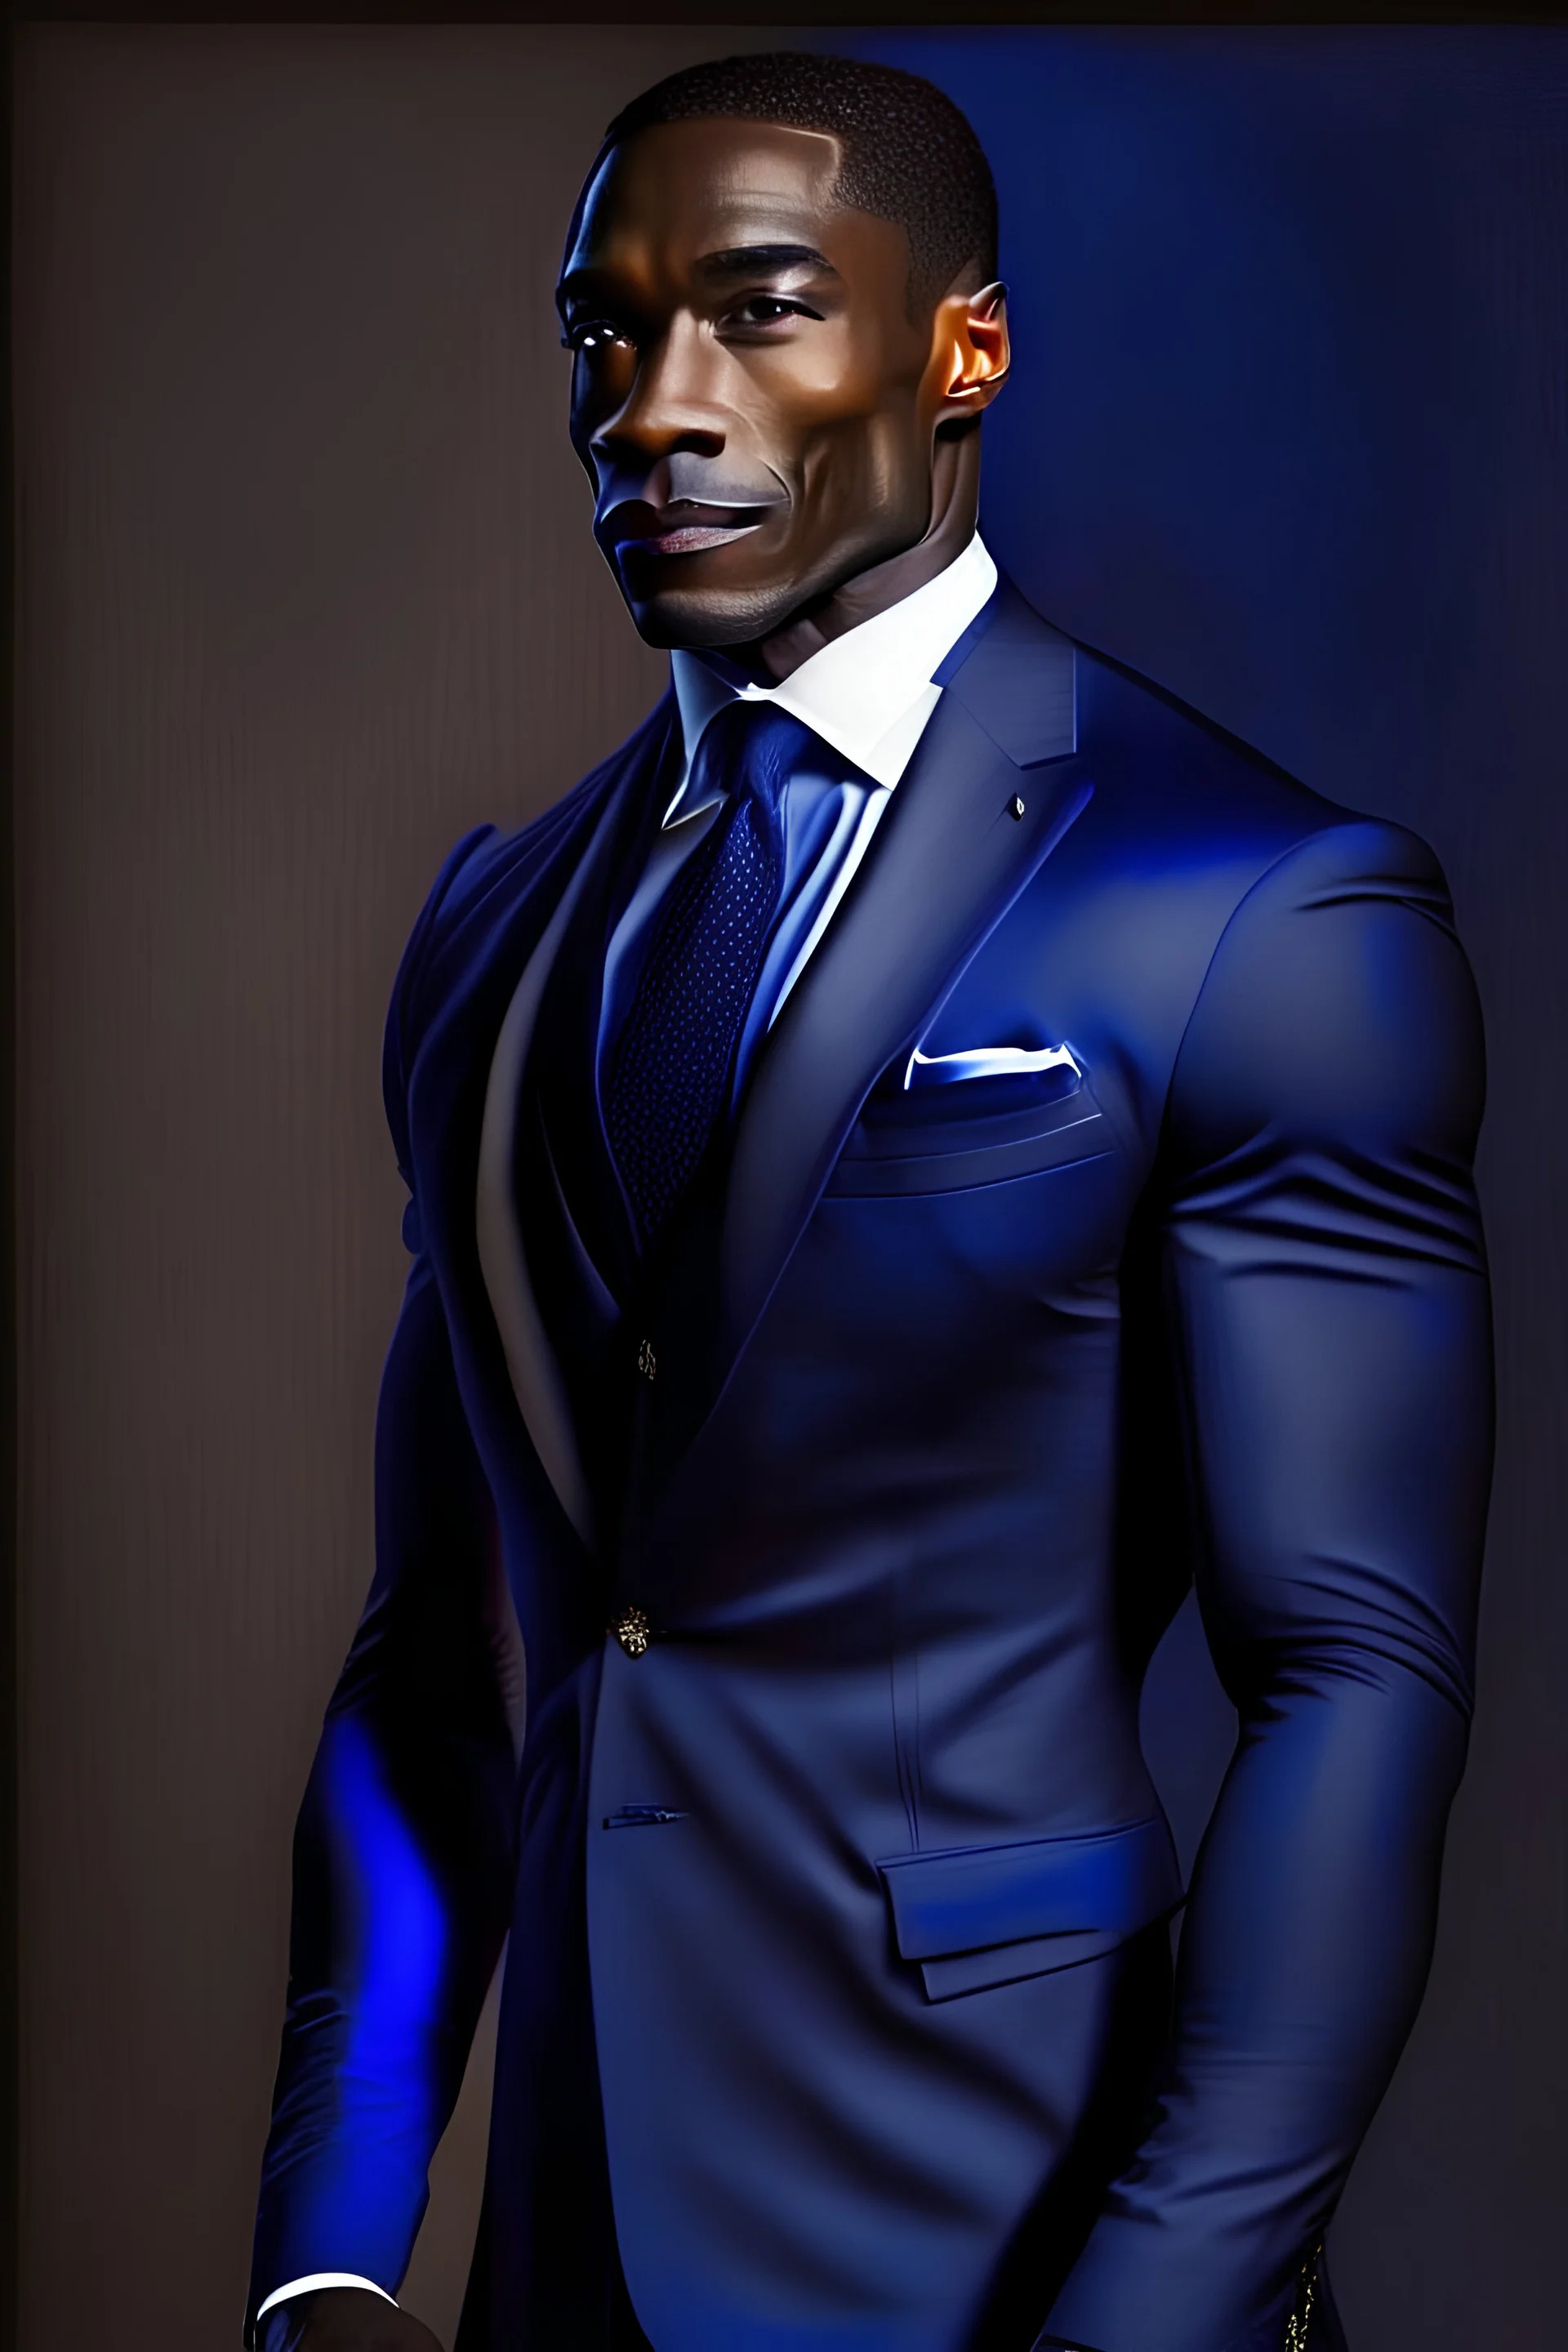 /imagine full length handsome 40 year old brown skinned african american man in black formal wear with a royal blue tie with black background